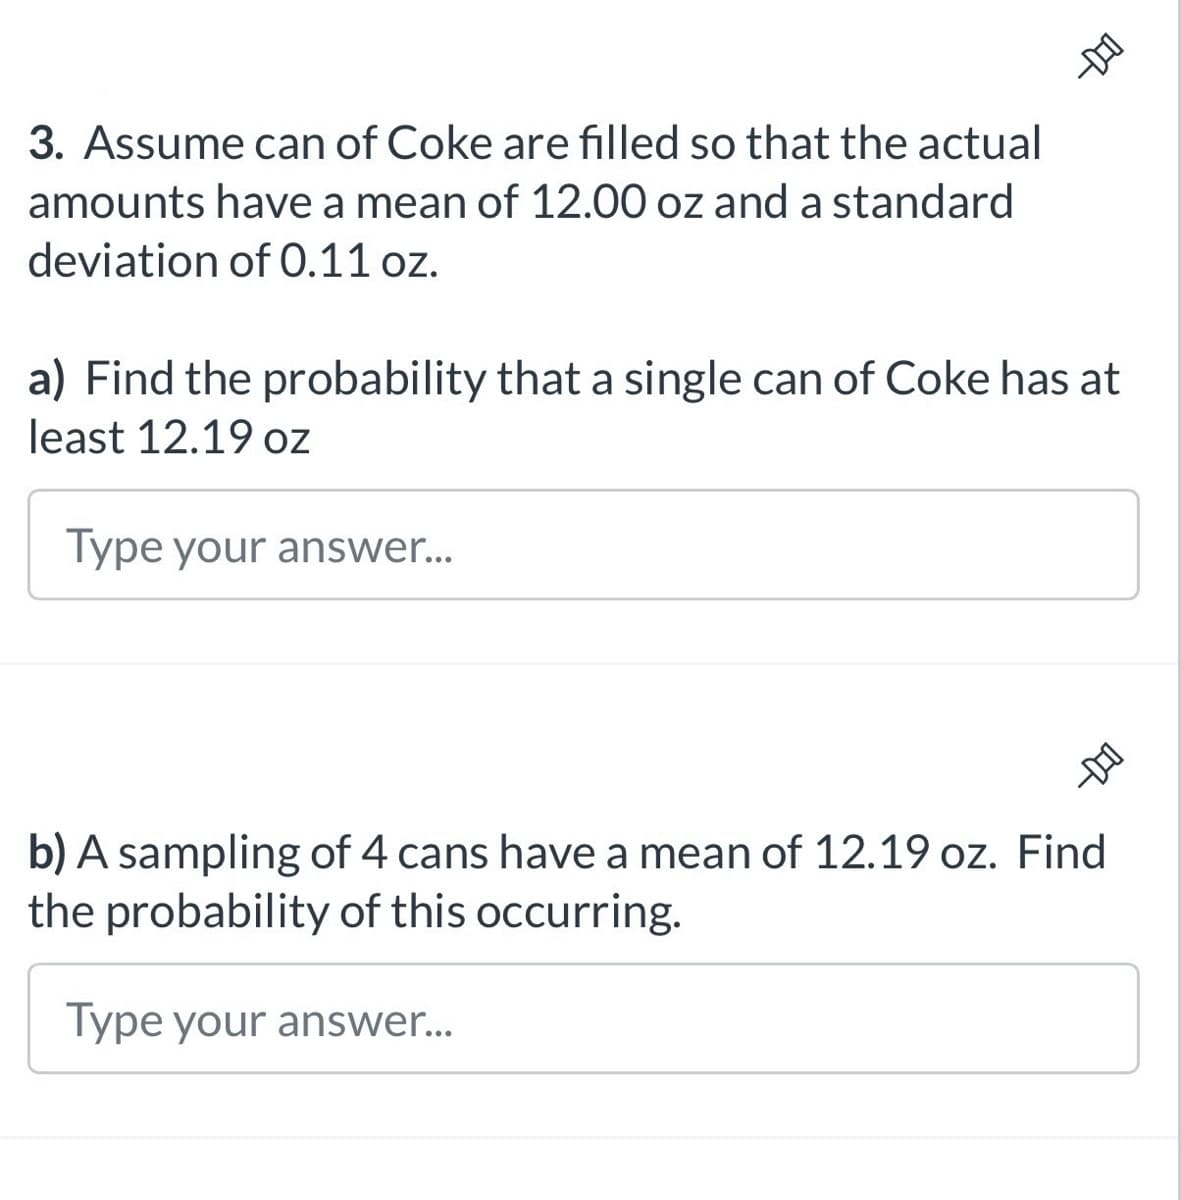 -DIO
3. Assume can of Coke are filled so that the actual
amounts have a mean of 12.00 oz and a standard
deviation of 0.11 oz.
a) Find the probability that a single can of Coke has at
least 12.19 oz
Type your answer...
b) A sampling of 4 cans have a mean of 12.19 oz. Find
the probability of this occurring.
Type your answer...
--DO